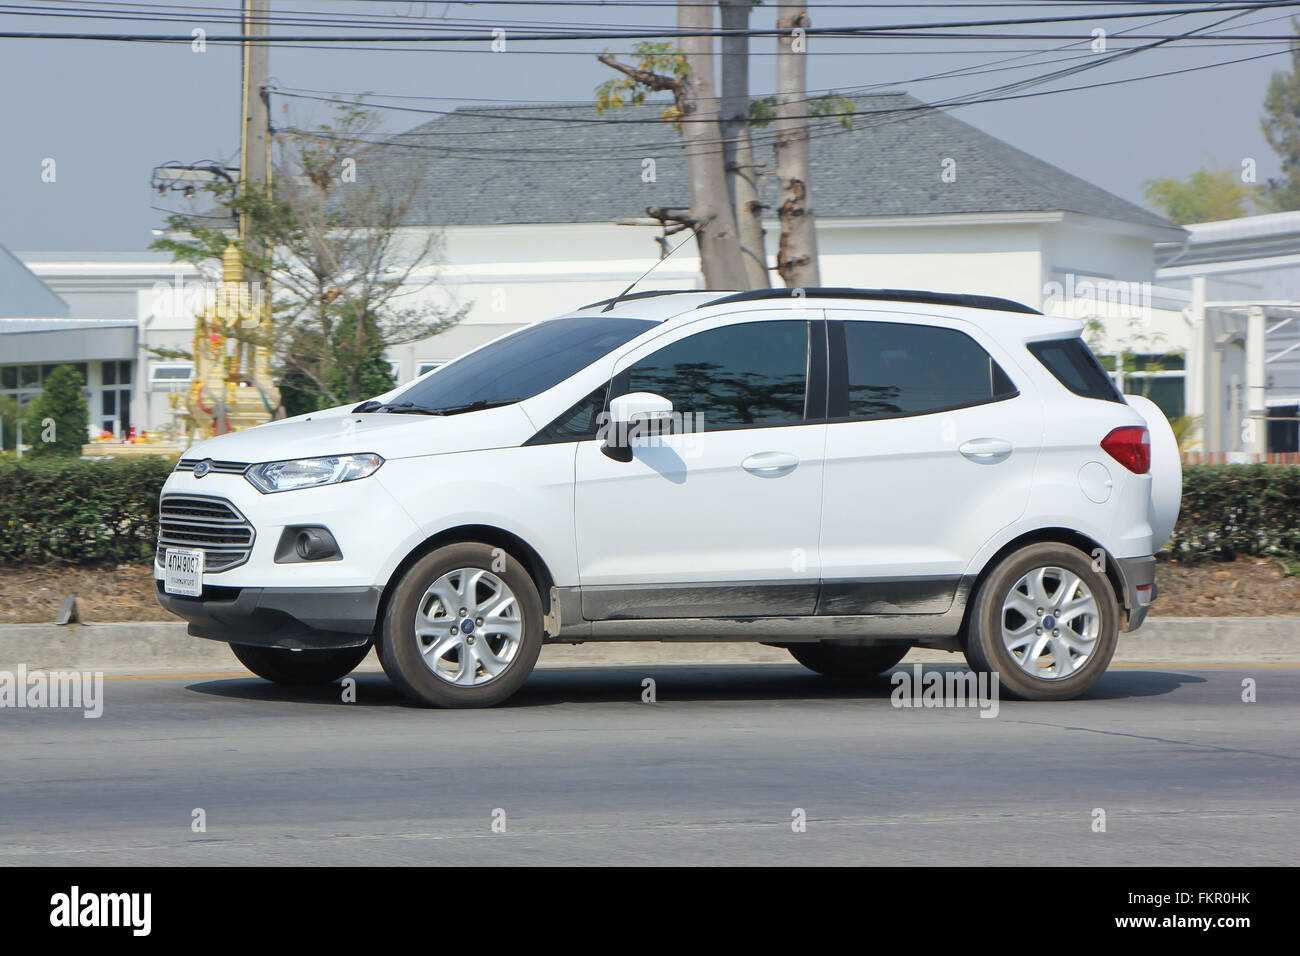 Private car, Ford Ecosport, Suv car for Urban User Stock Photo